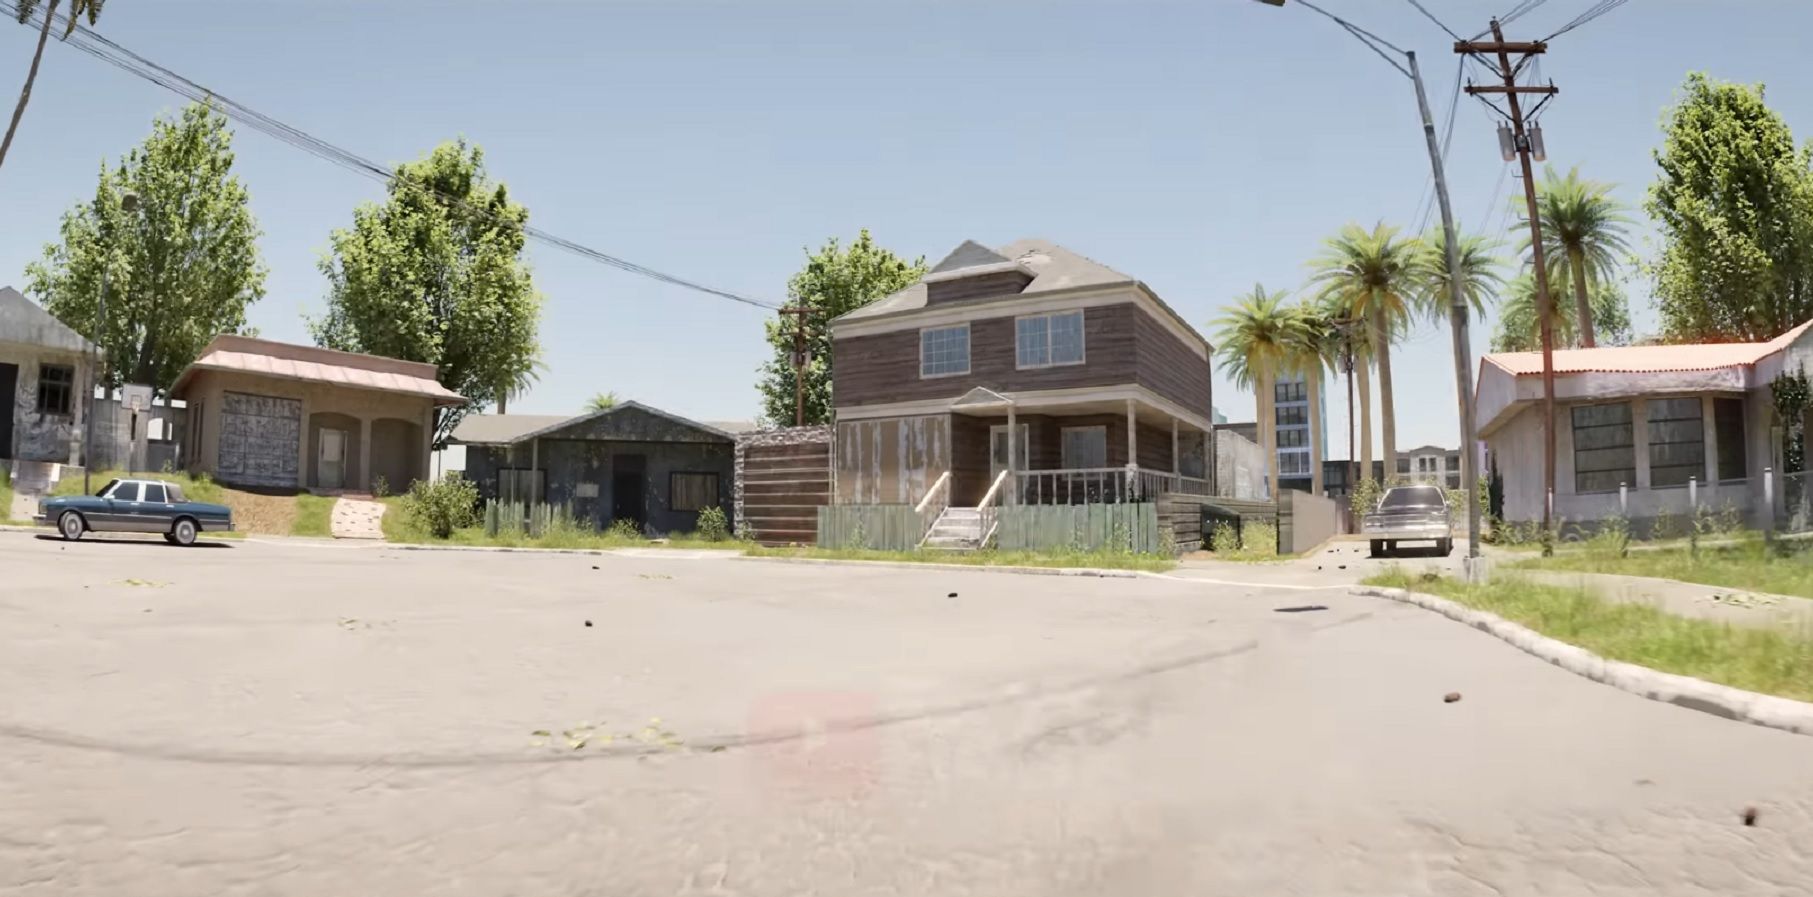 A high-definition screenshot from a San Andreas remaster showing Grove Street.